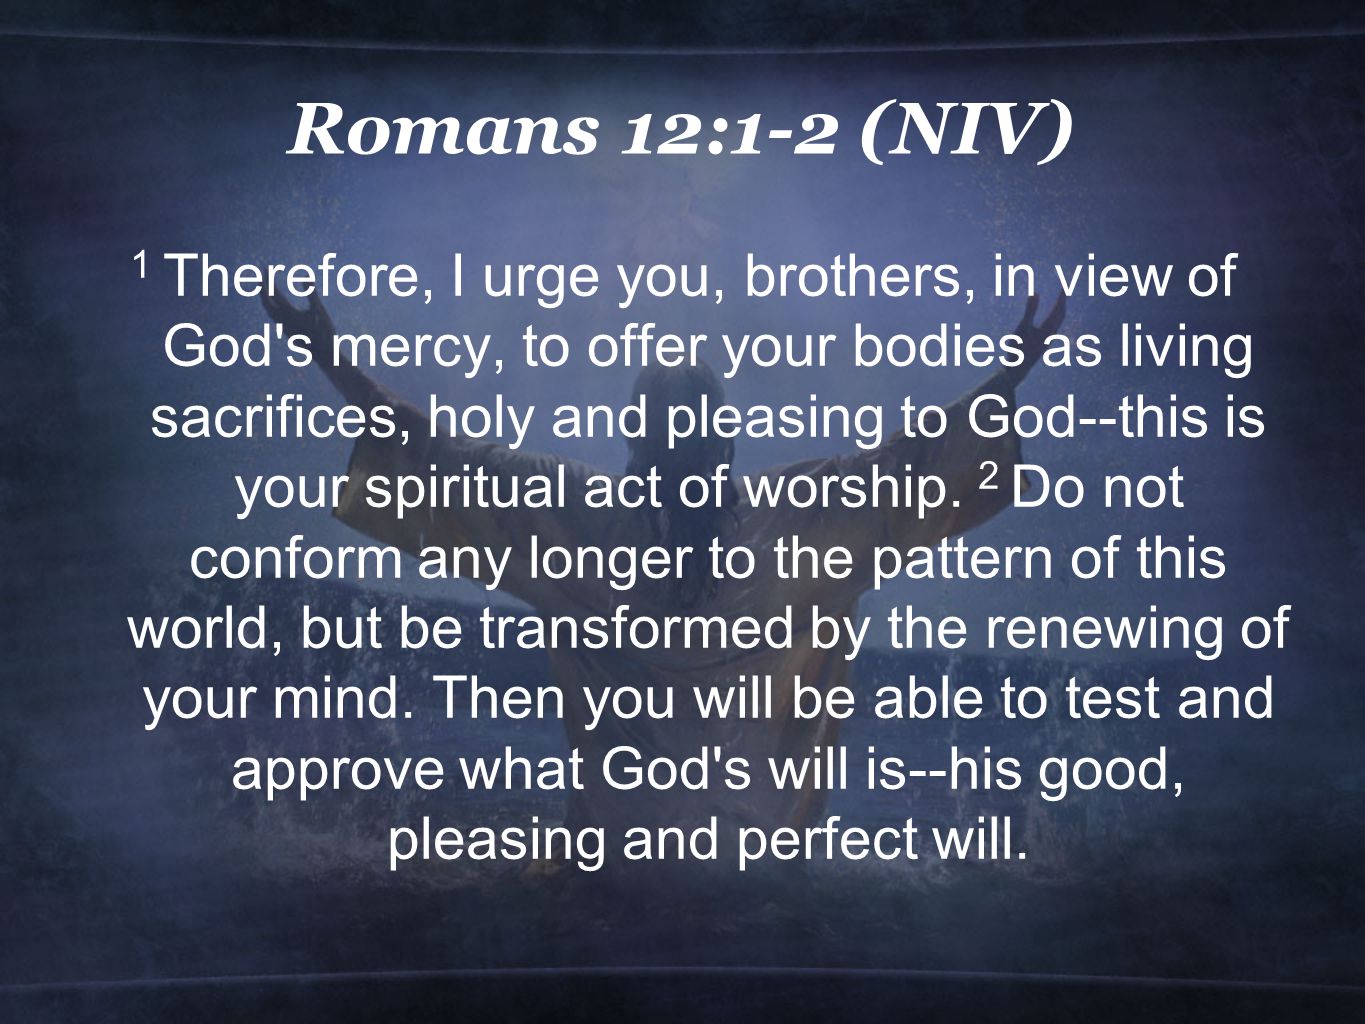 Romans 12:1-2 (NIV) 1 Therefore, I urge you, brothers, in view of God s mercy, to offer your bodies as living sacrifices, holy and pleasing to God--this is your spiritual act of worship.